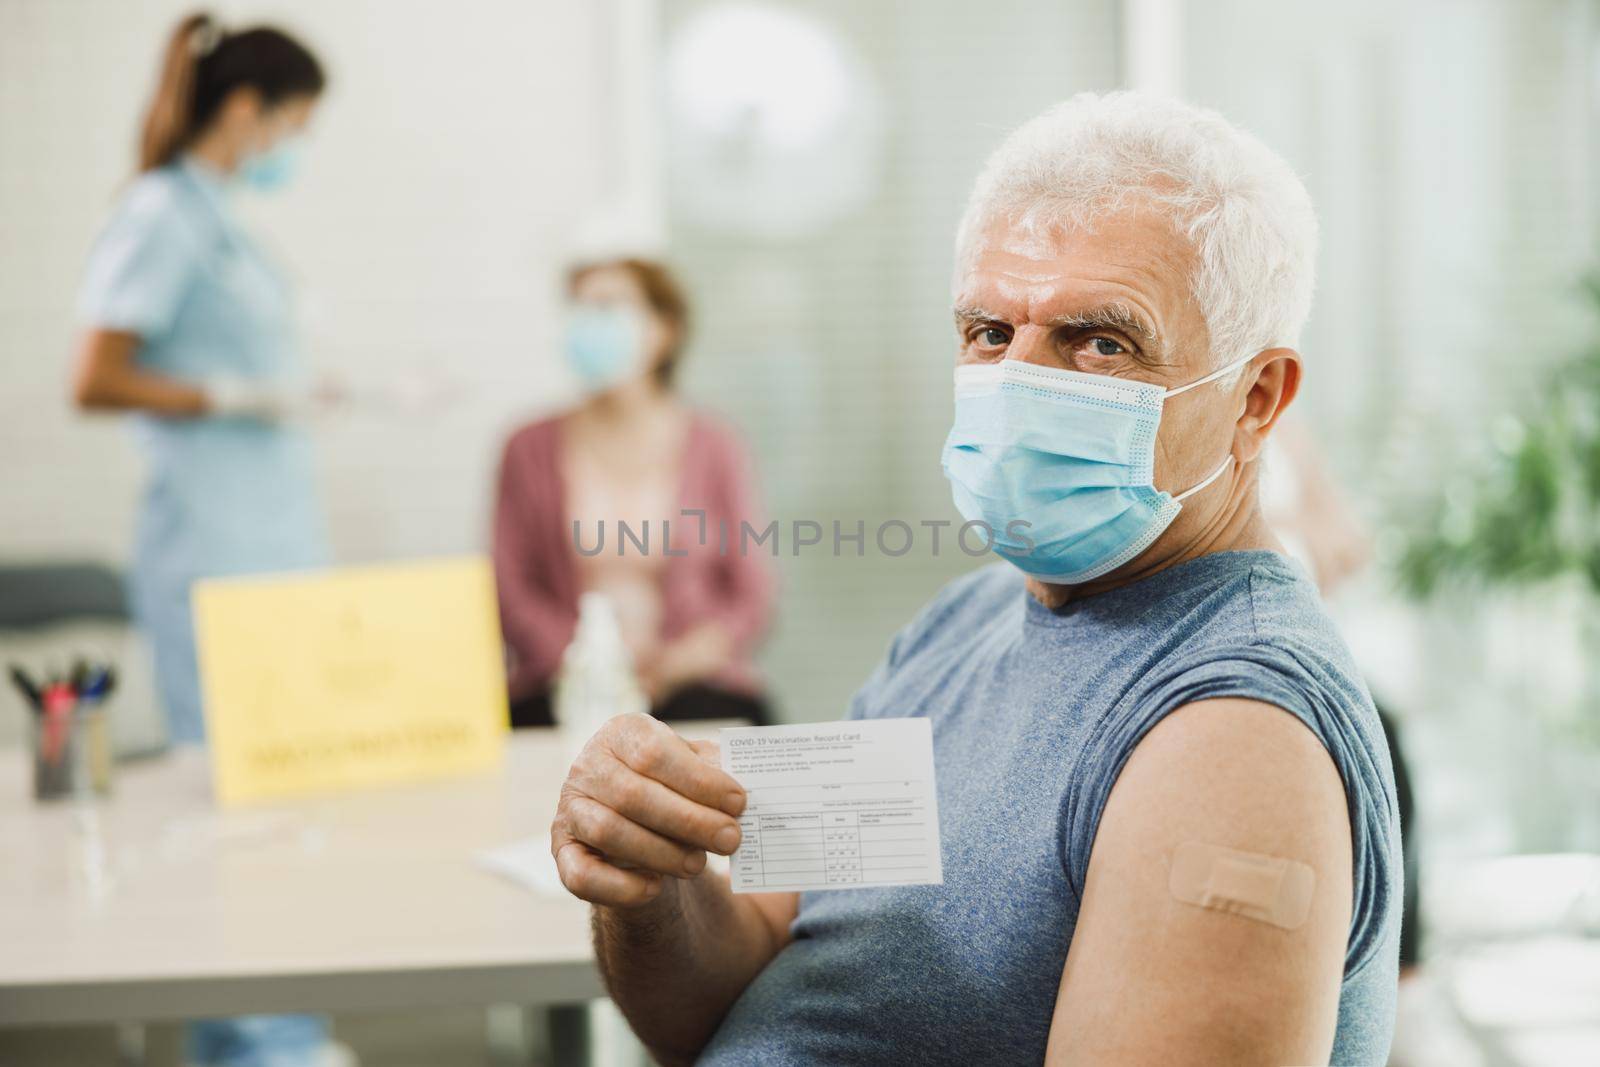 A senior man showing vaccination certificate after receiving the Covid-19 vaccine. Looking at camera.